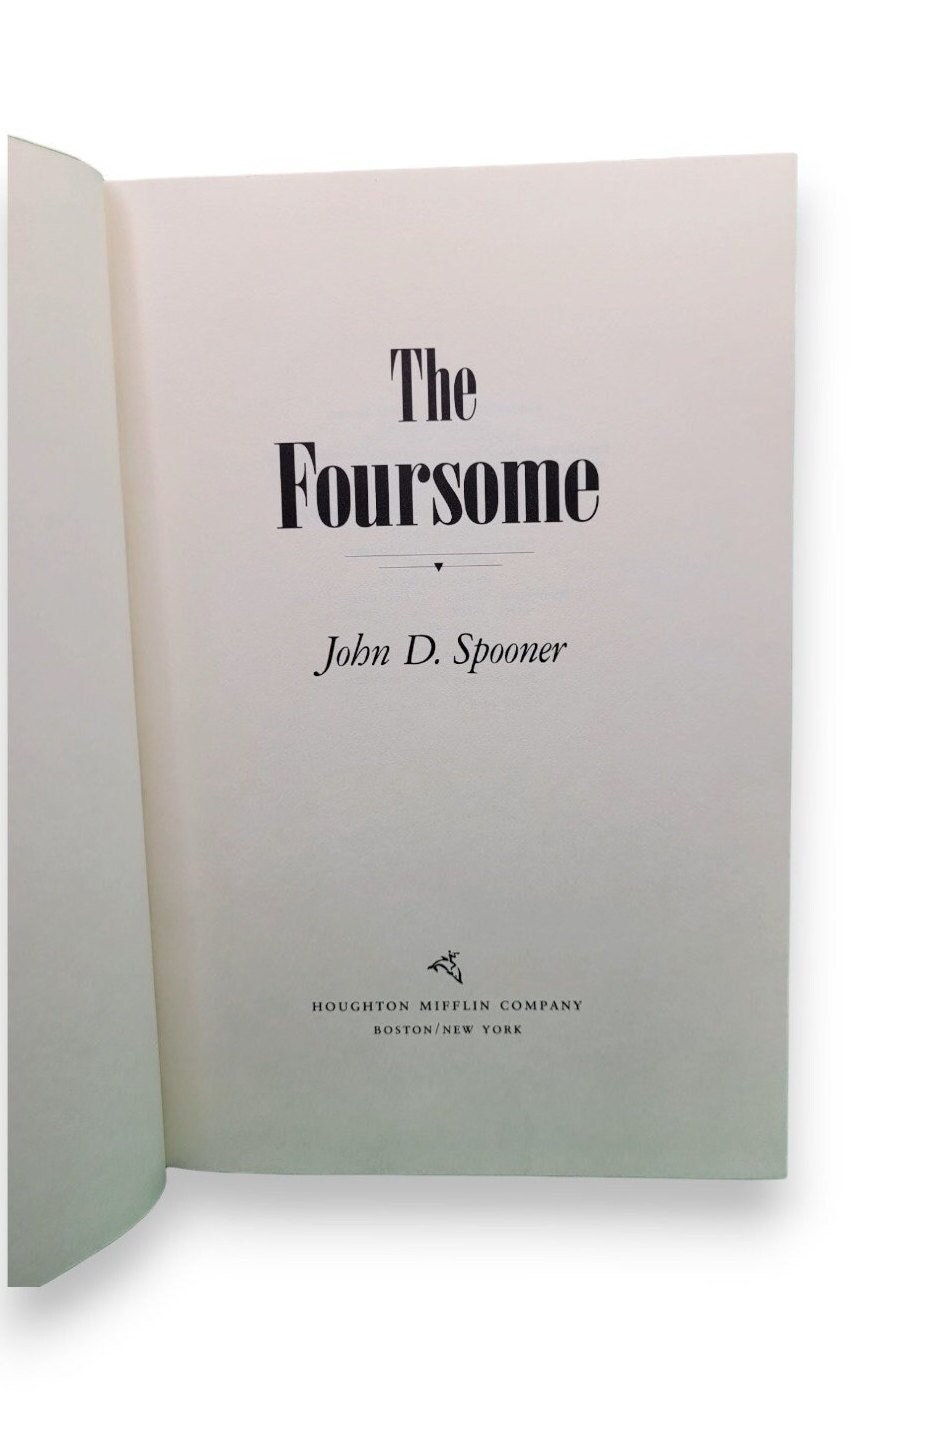 The Foursome by John D. Spooner 1993